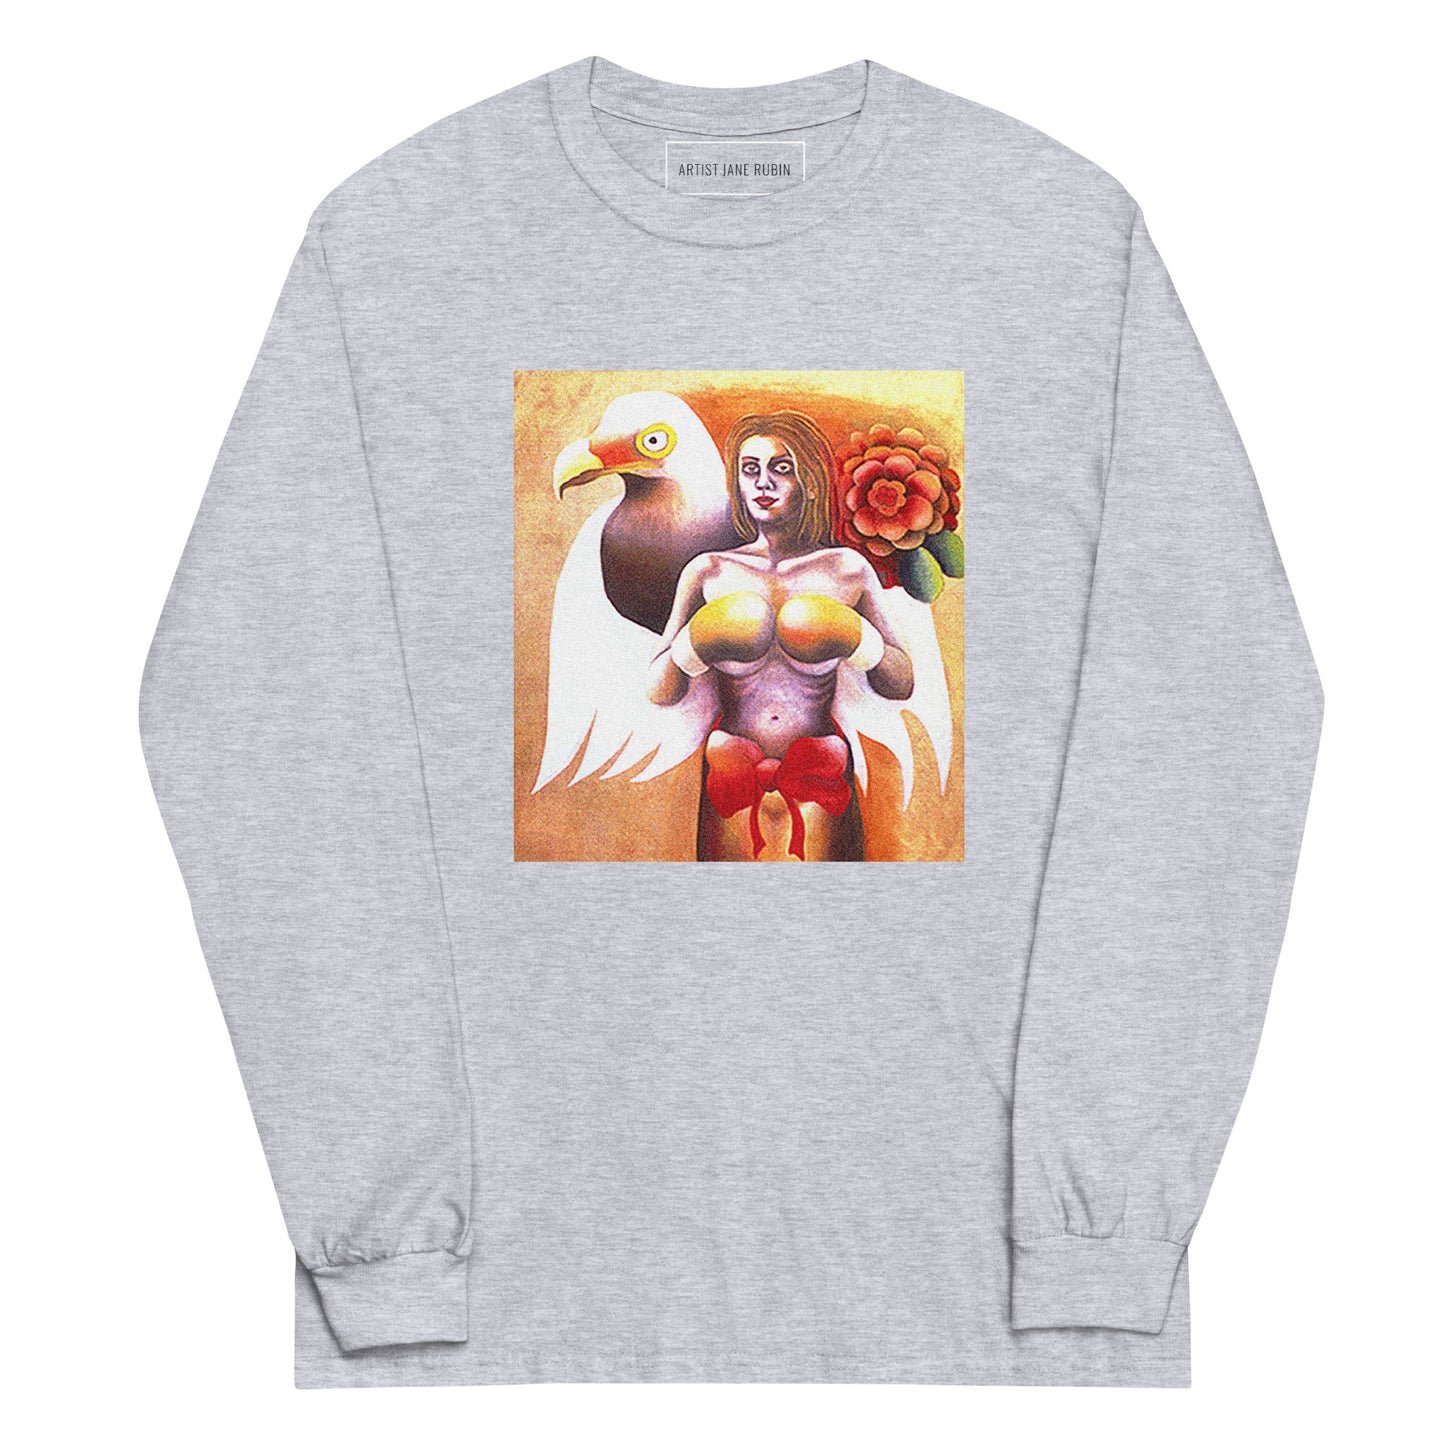 Champion — Oil Painting — on 100% Cotton Long-Sleeve Grey, Tan, Light Blue or White Shirt (No Logo)